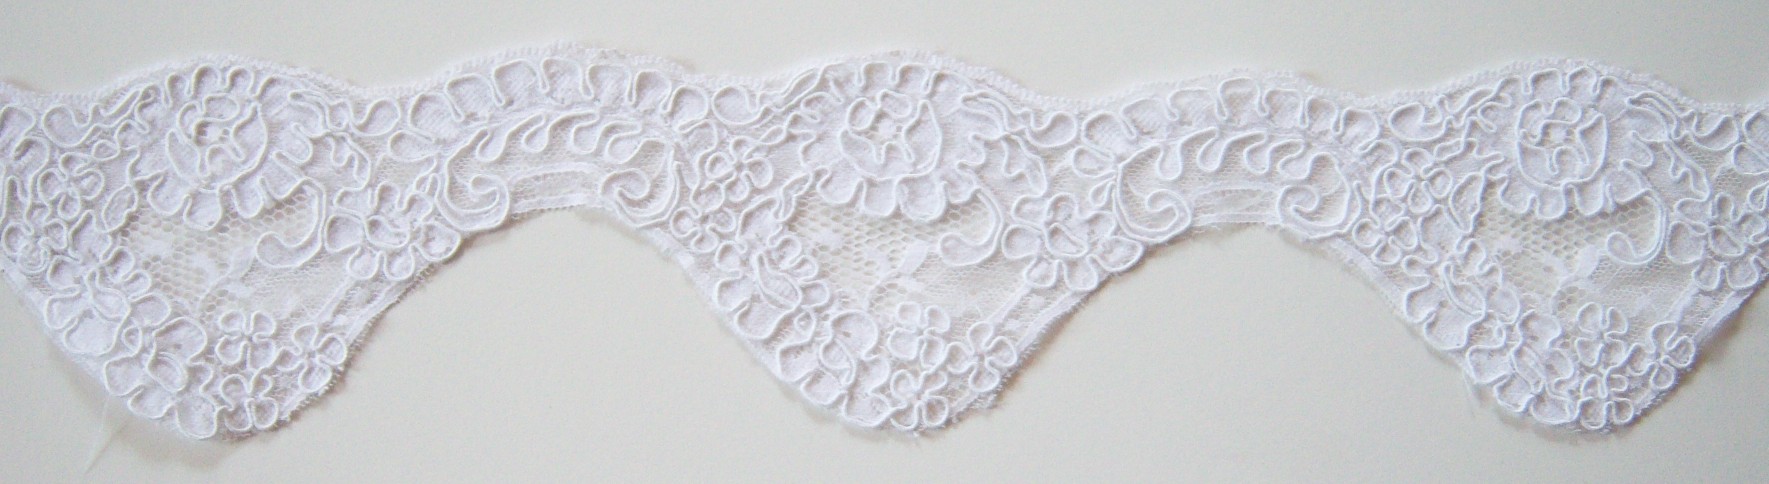 White Embroidered 3 1/2" Lace